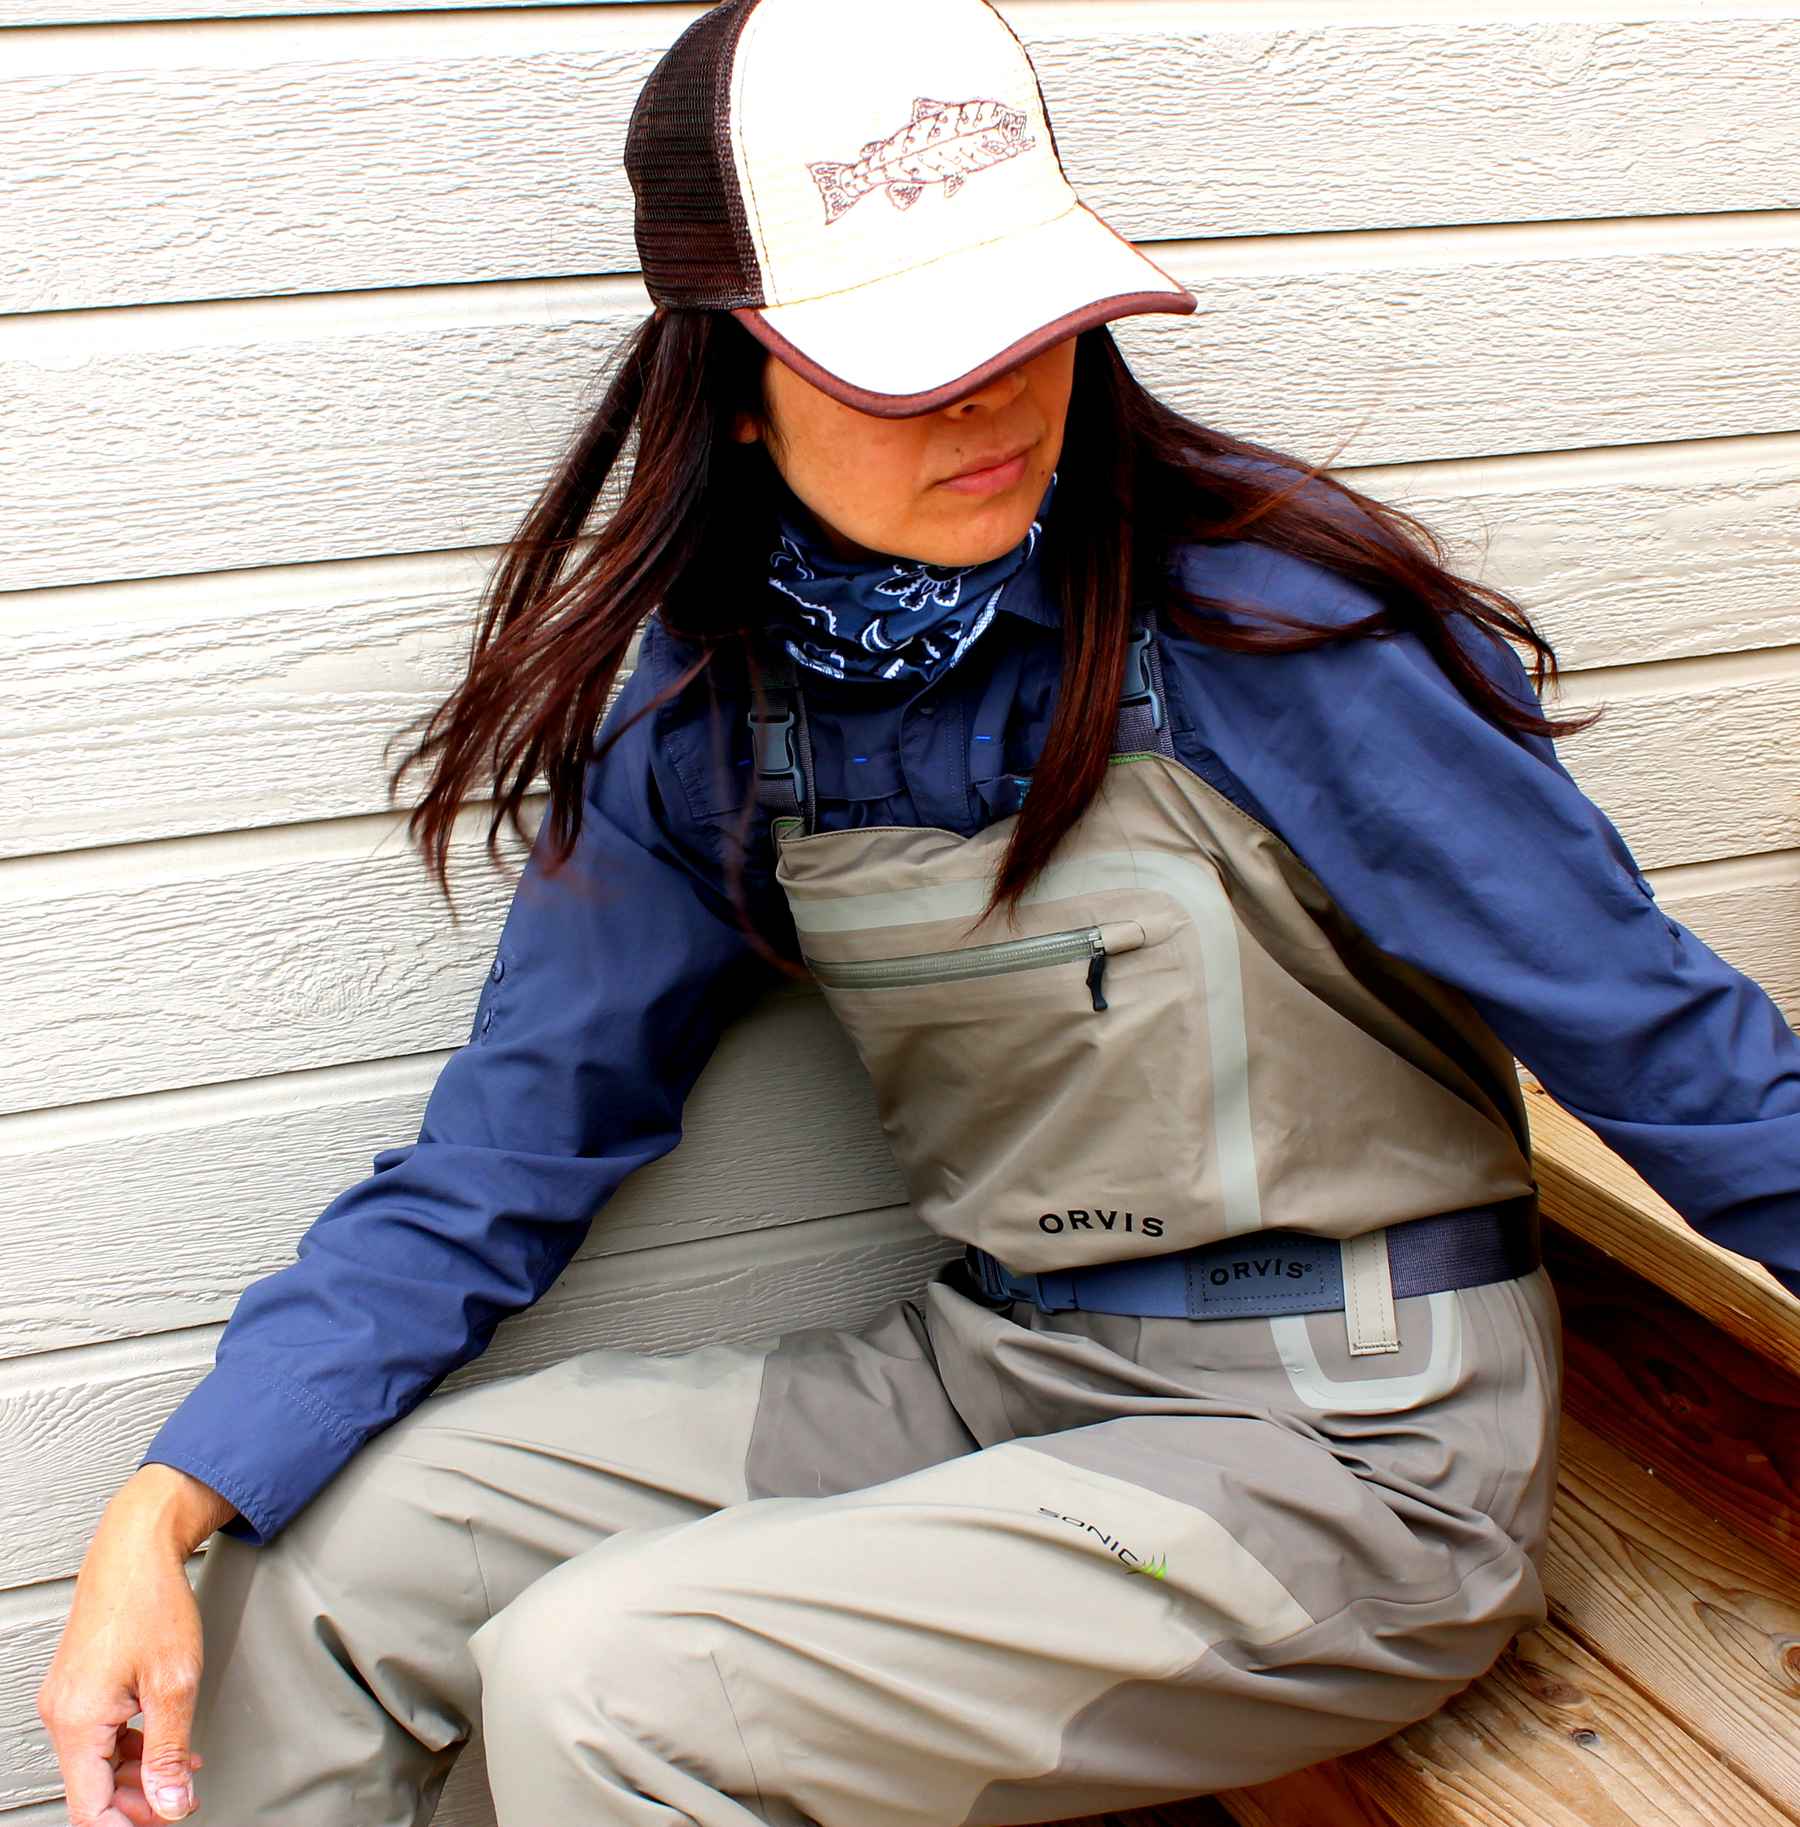 Women's Fly Fishing Collection - Women's fishing clothing and Wading boots. Fishing  waders designed for women.